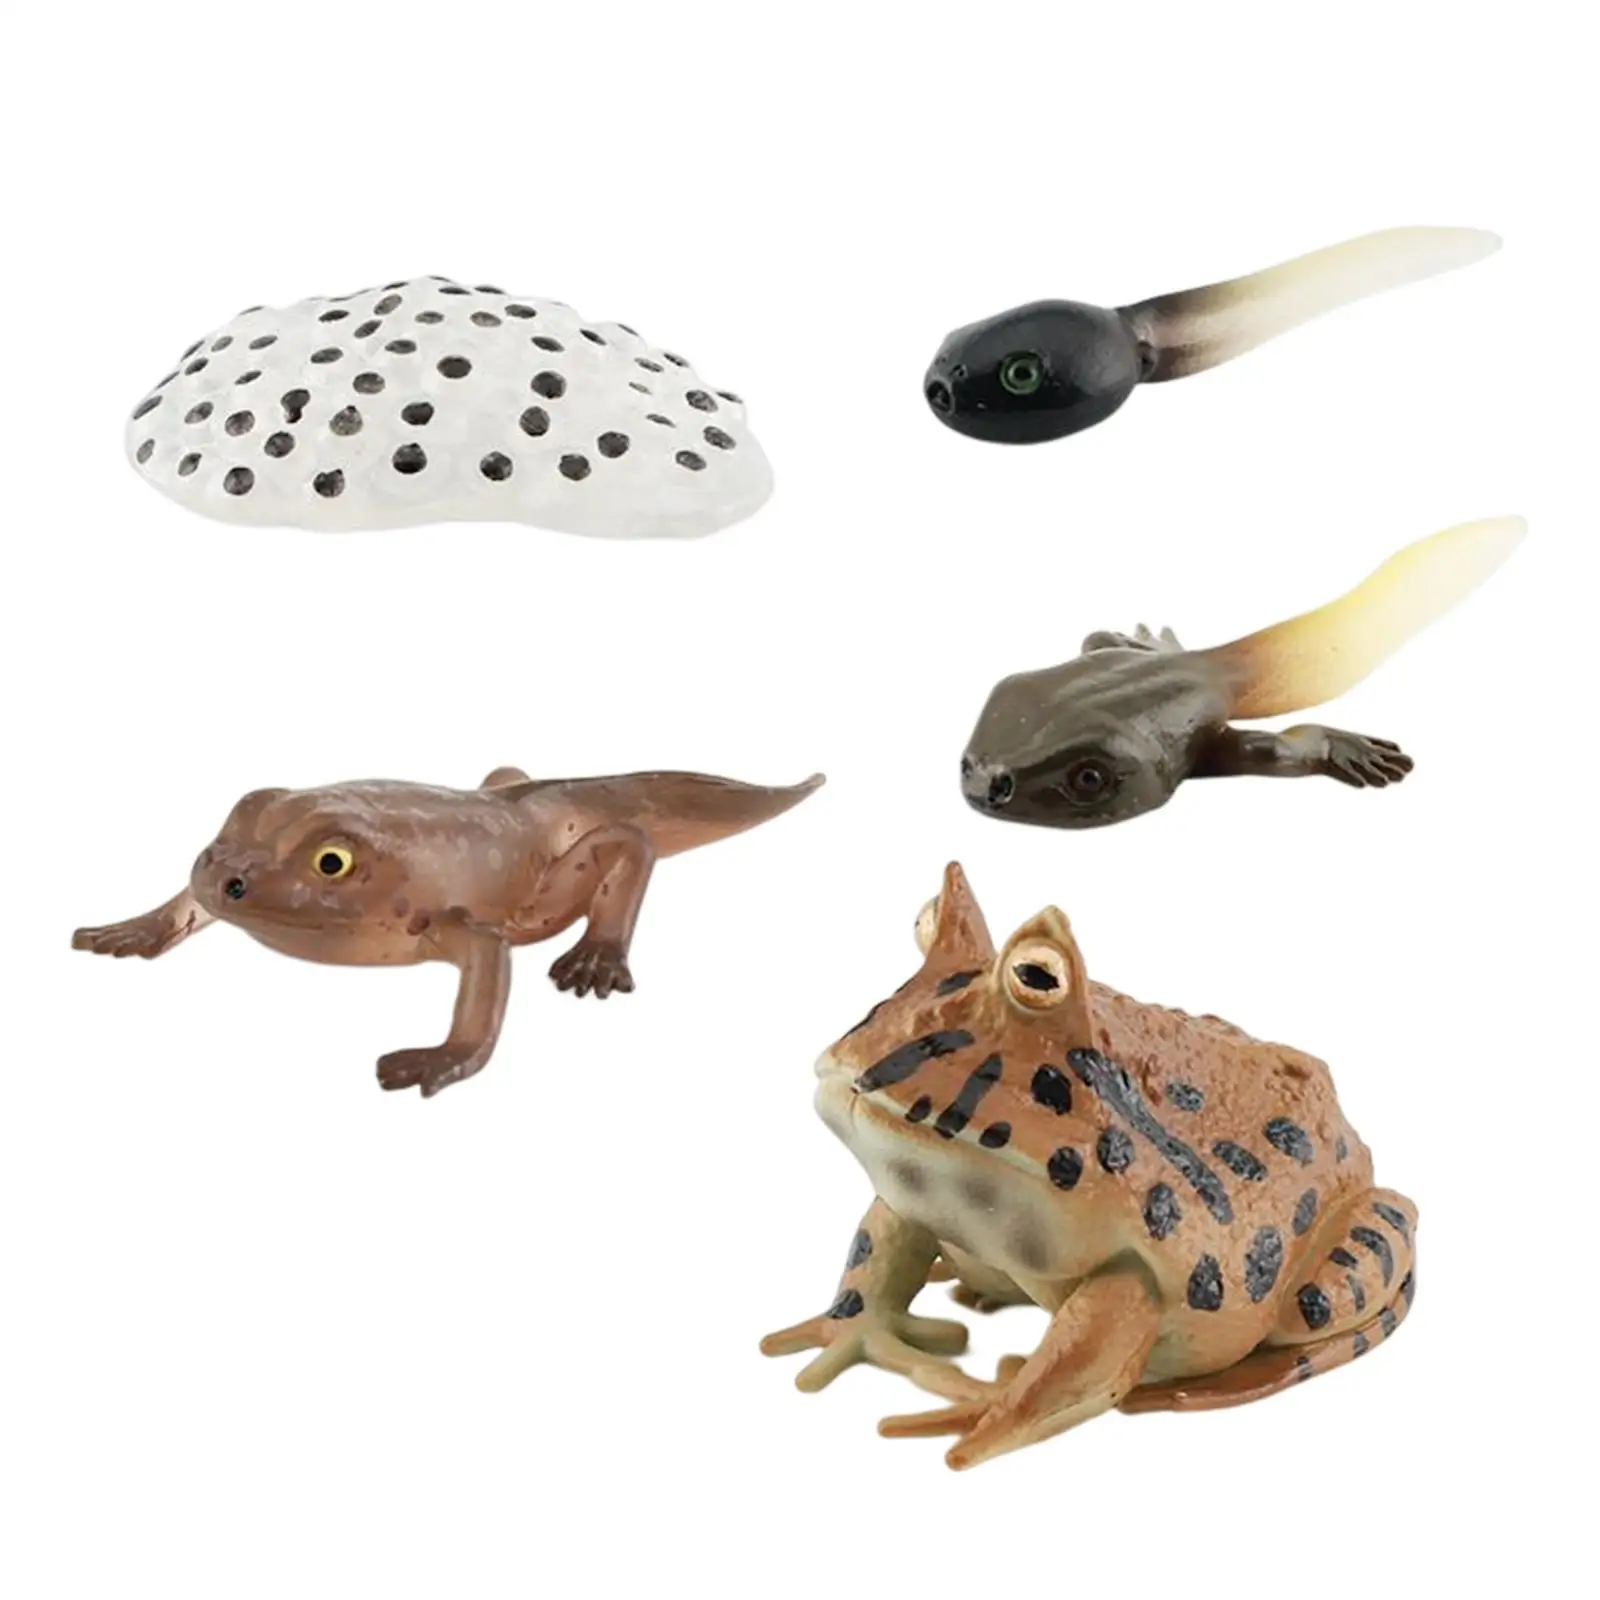 Life Cycle Figurines 4 Stages of Frog Frogs Life Cycle Model for Preschool Early Educational